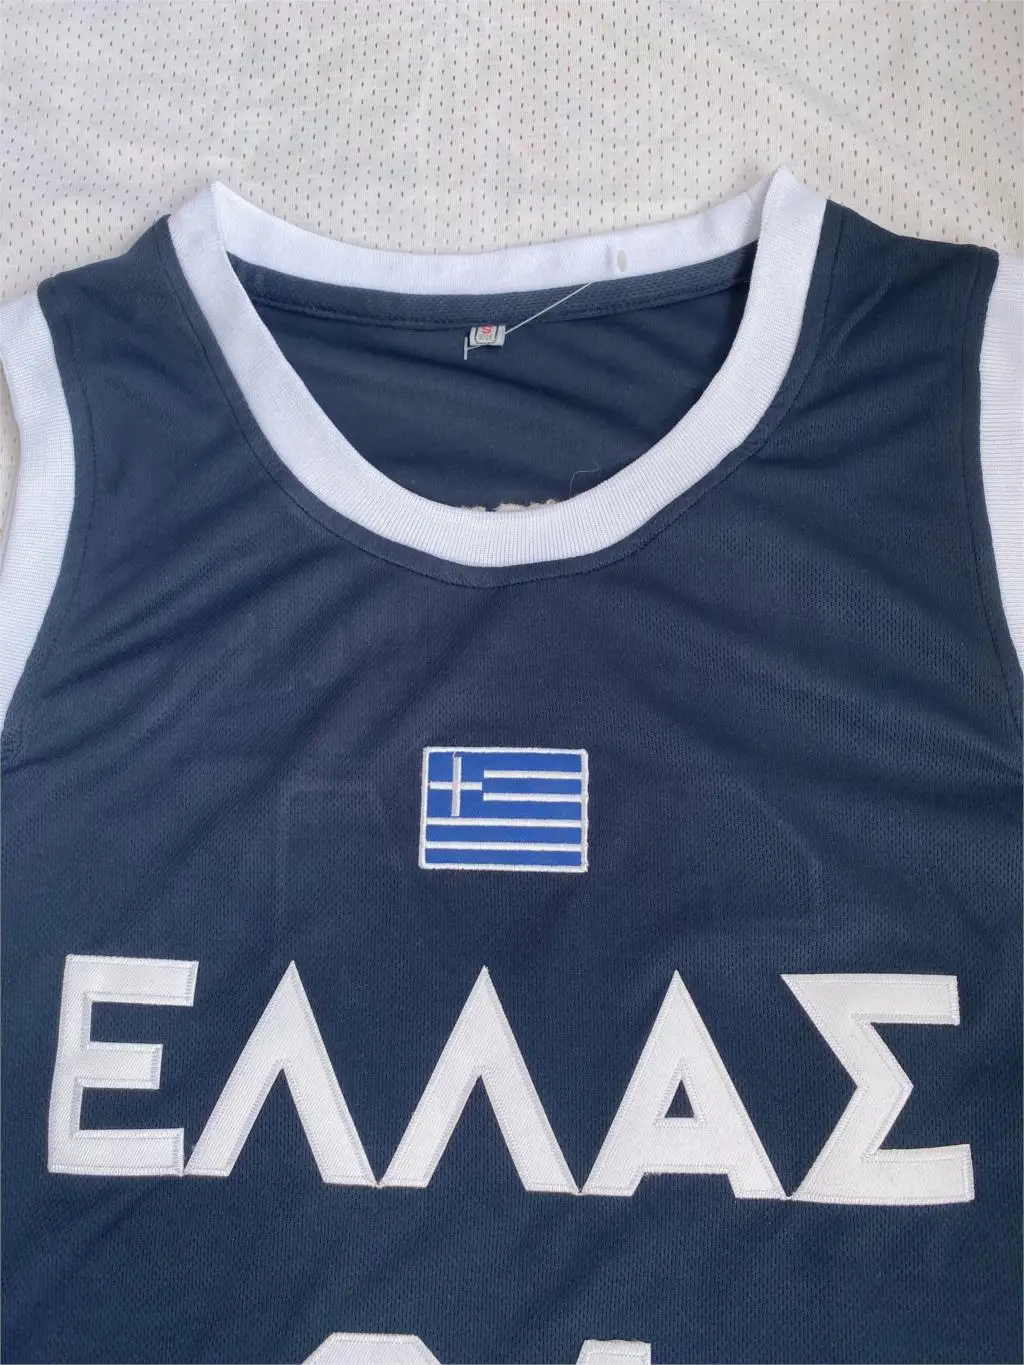 

Mens HELLAS Greek #34 Giannis ANTETOKOUNMPO G. BASKETBALL JERSEY Embroidery Stitches Top Quality Stitched embroidery